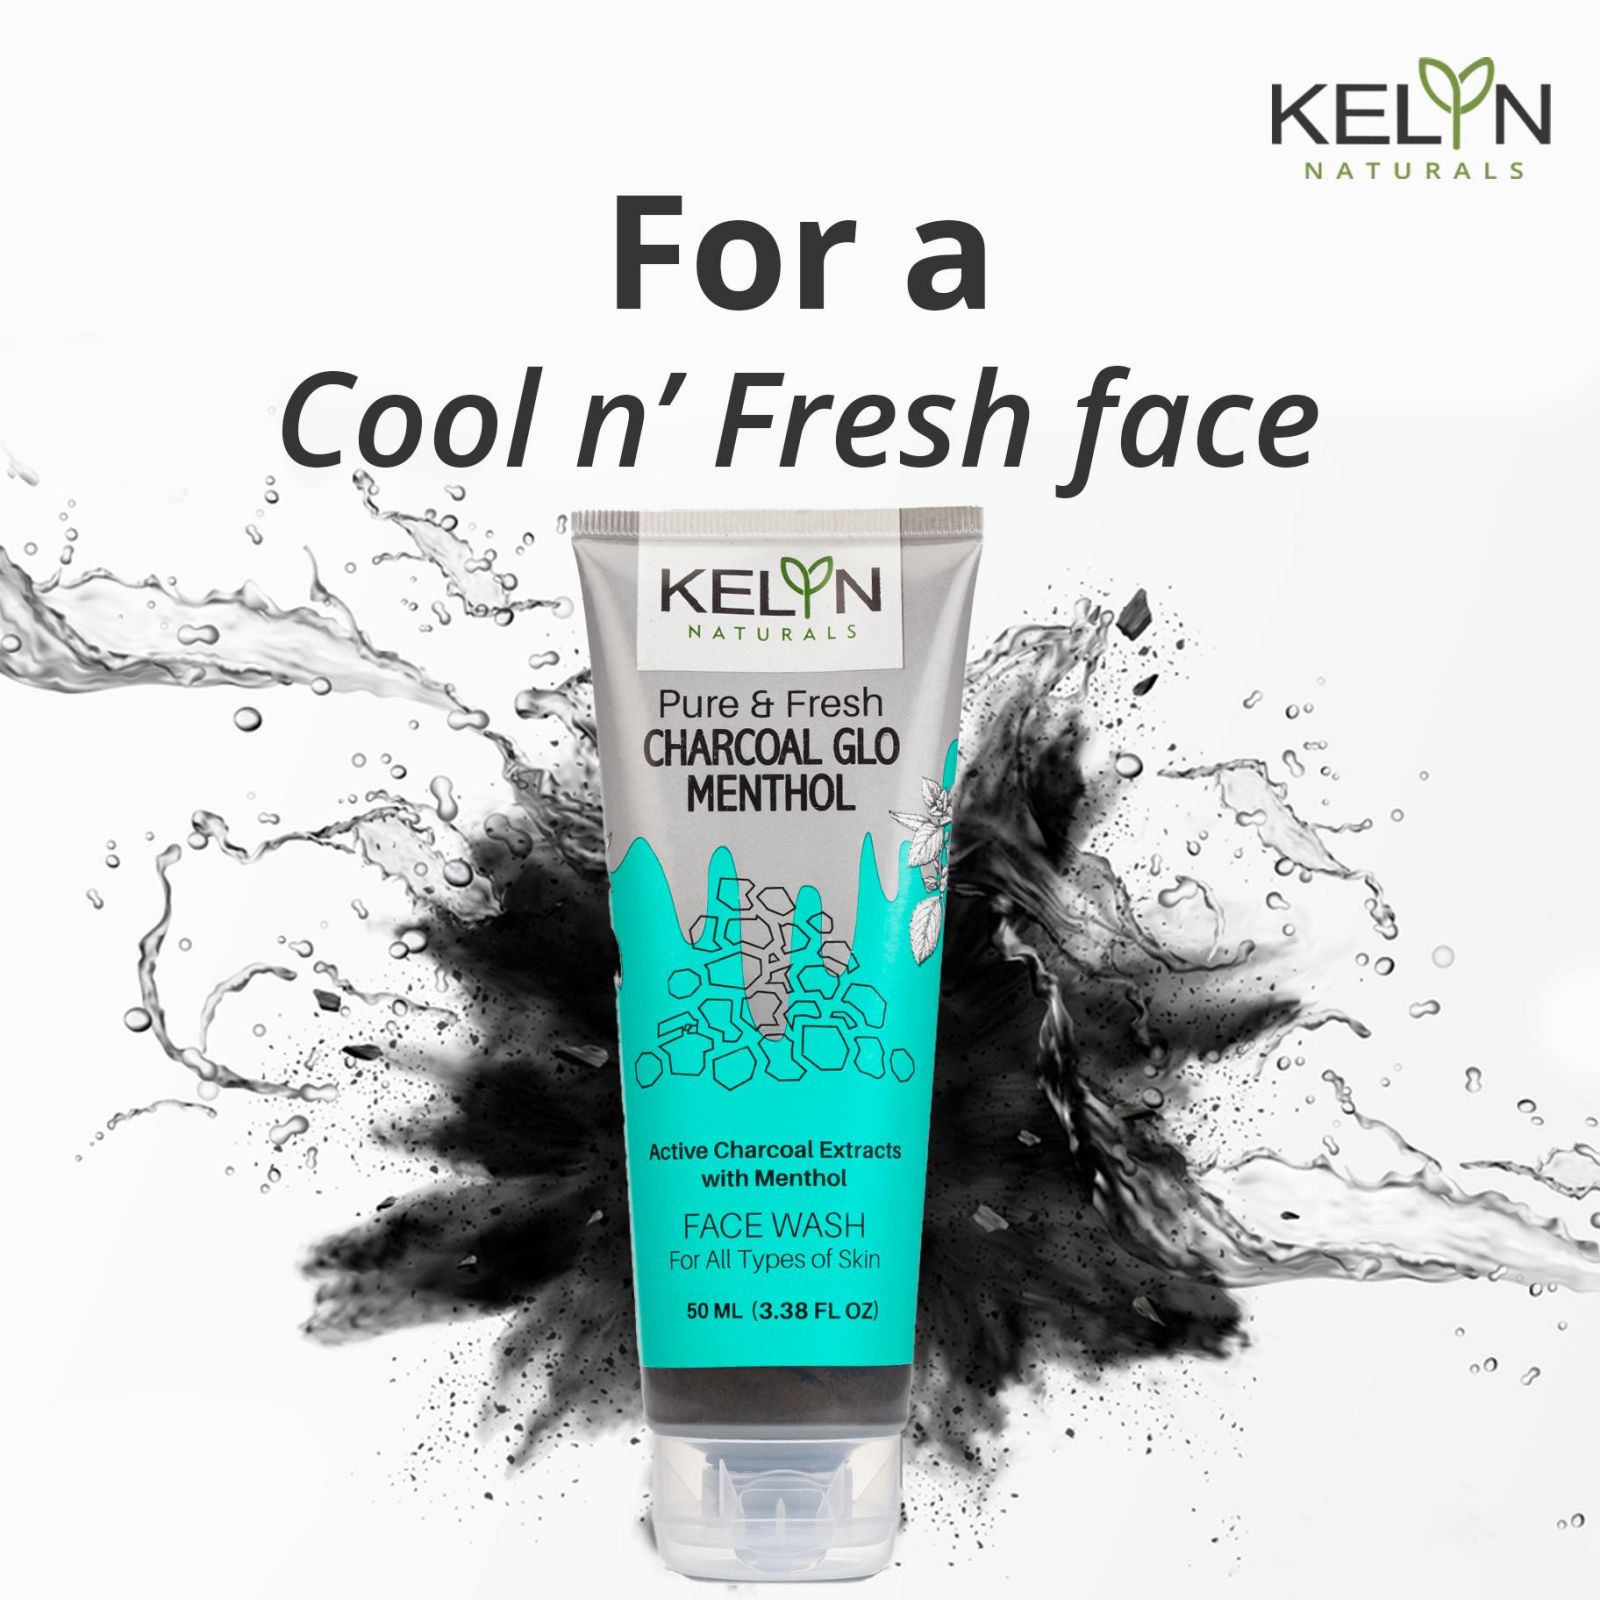 Kelyn Naturals Pure & Fresh Charcoal Glo Face Wash 100ml 